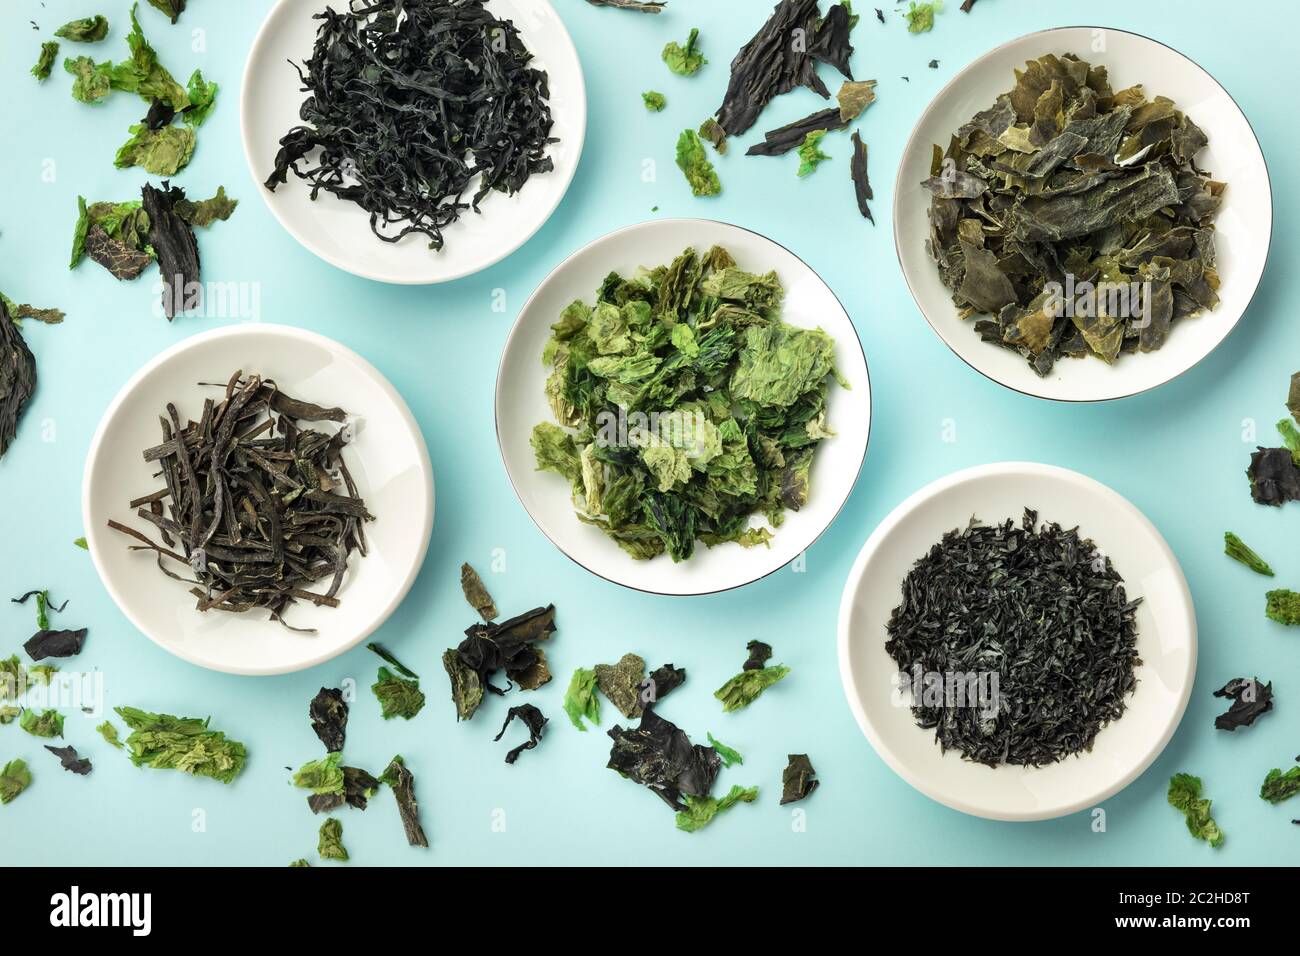 Various dry seaweed, sea vegetables, shot from above on a teal background Stock Photo